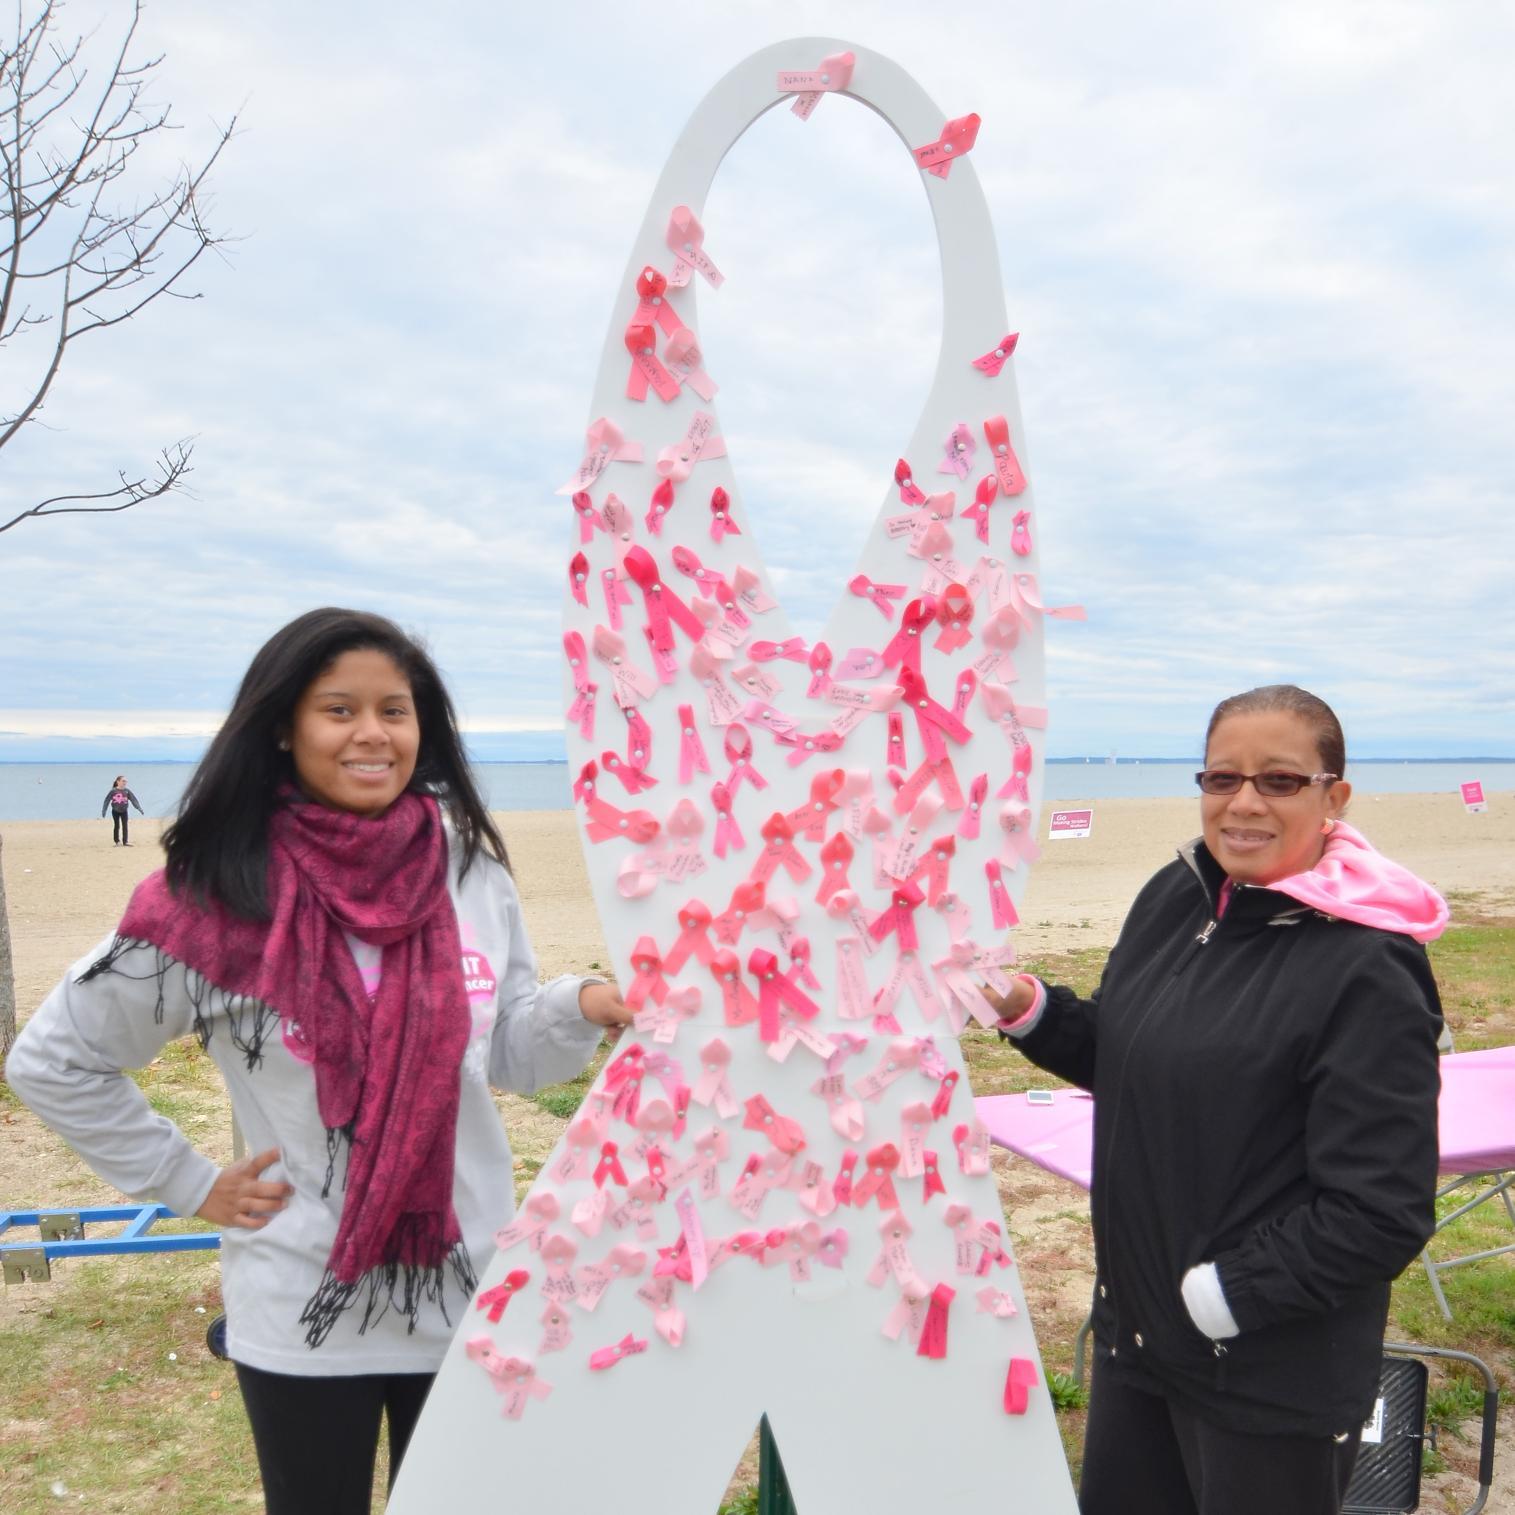 Join us to help the American Cancer Society Finish The Fight Against Breast Cancer on Sunday, October 18, 2015 at Sherwood Island State Park in Westport!